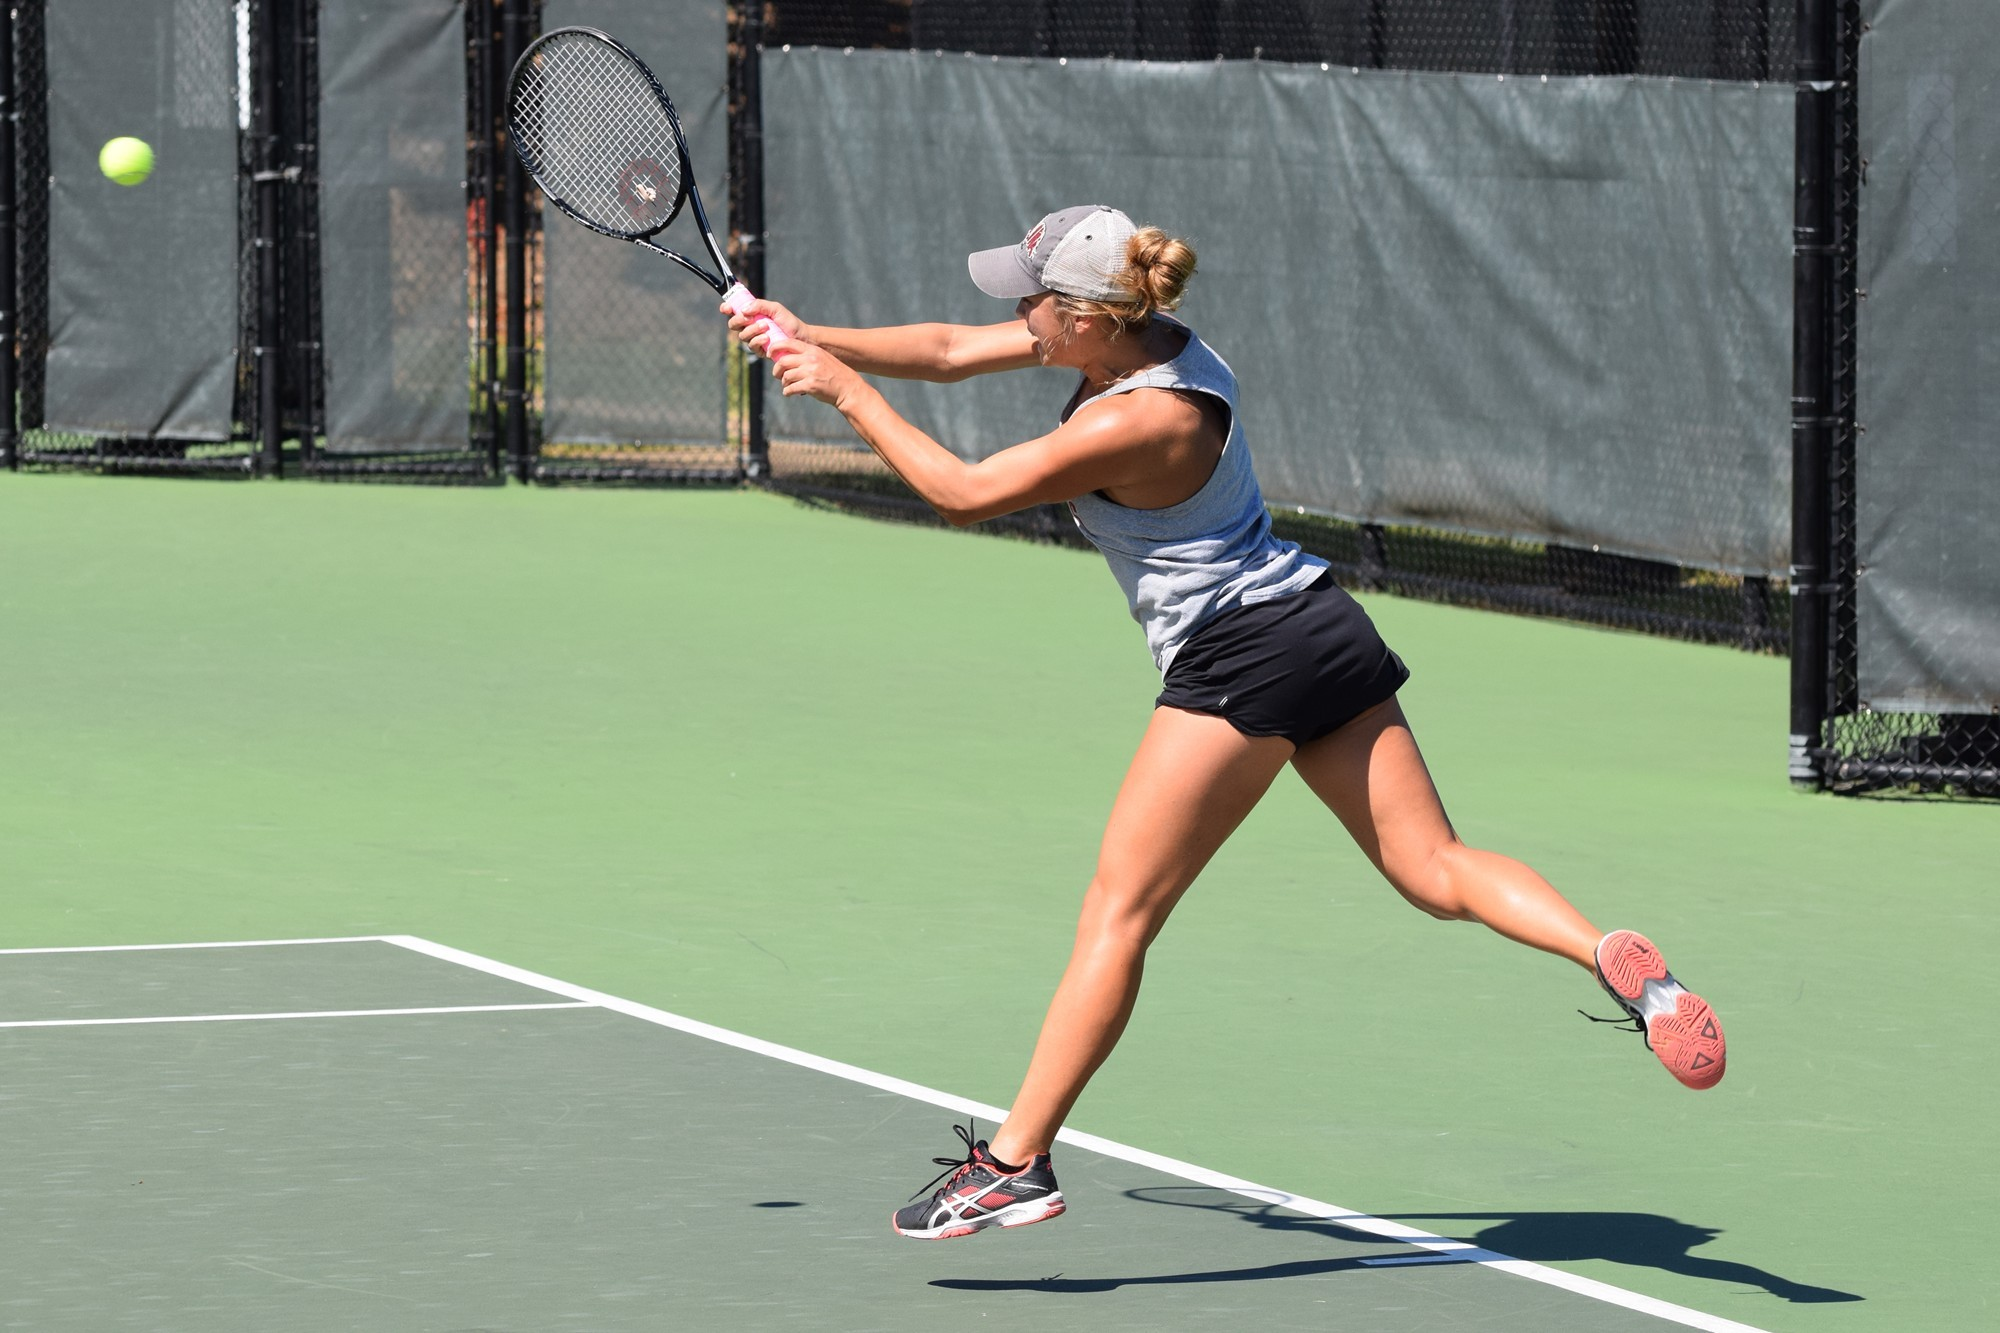 Carolina Has Strong Showing In Singles, Title Opportunities Await Sunday